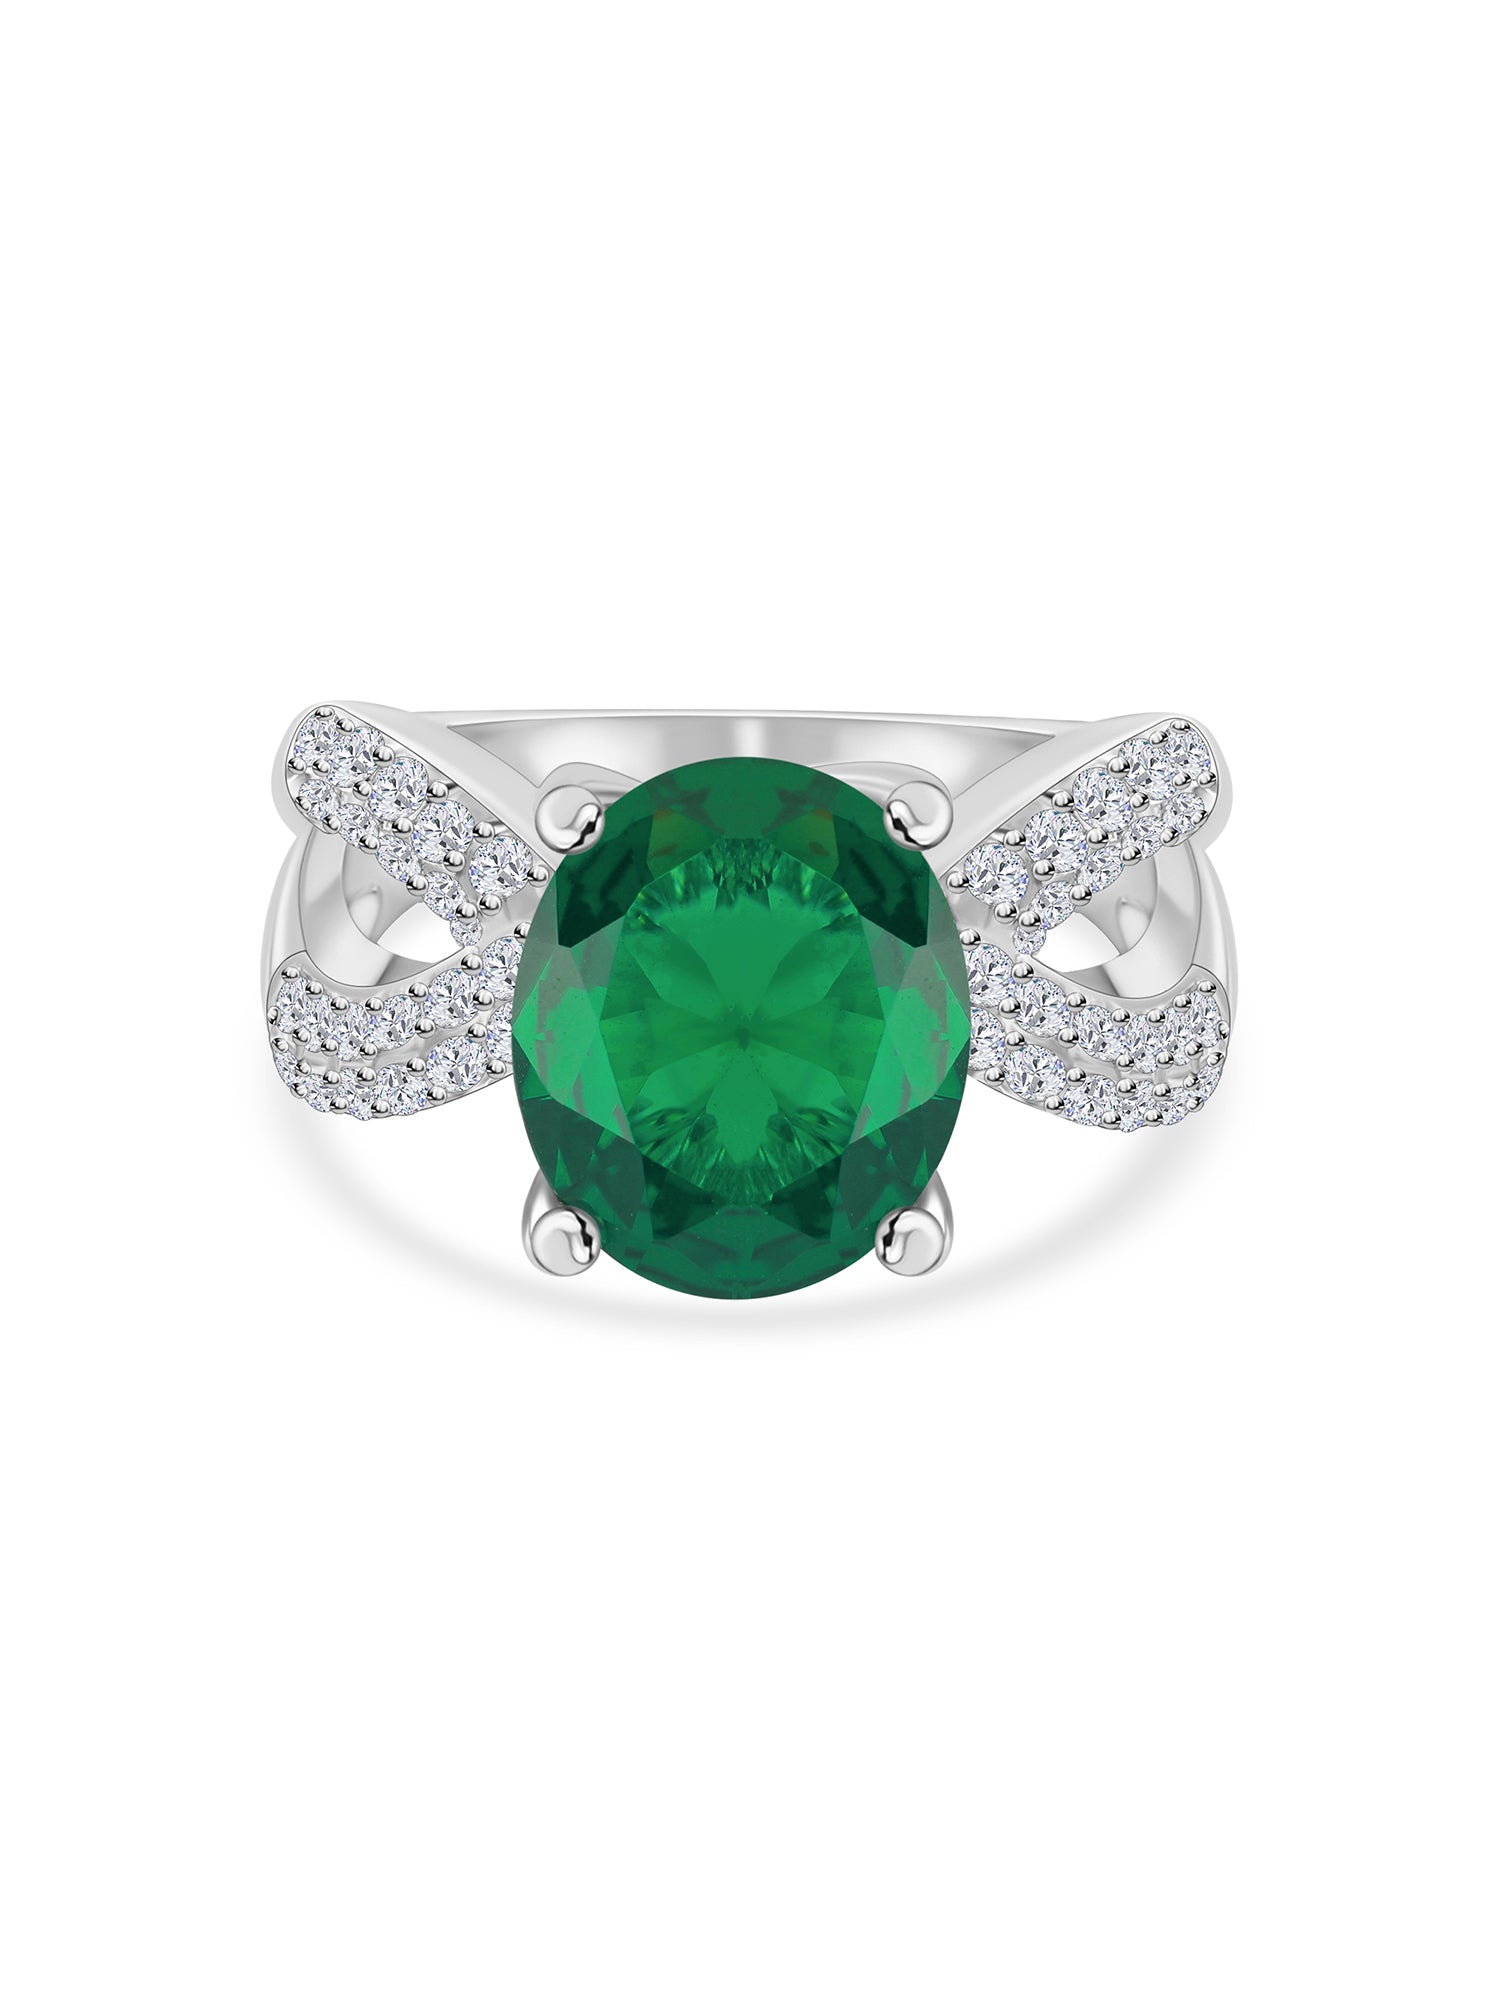 5 Carat Green Emerald Party Ring For Women-1